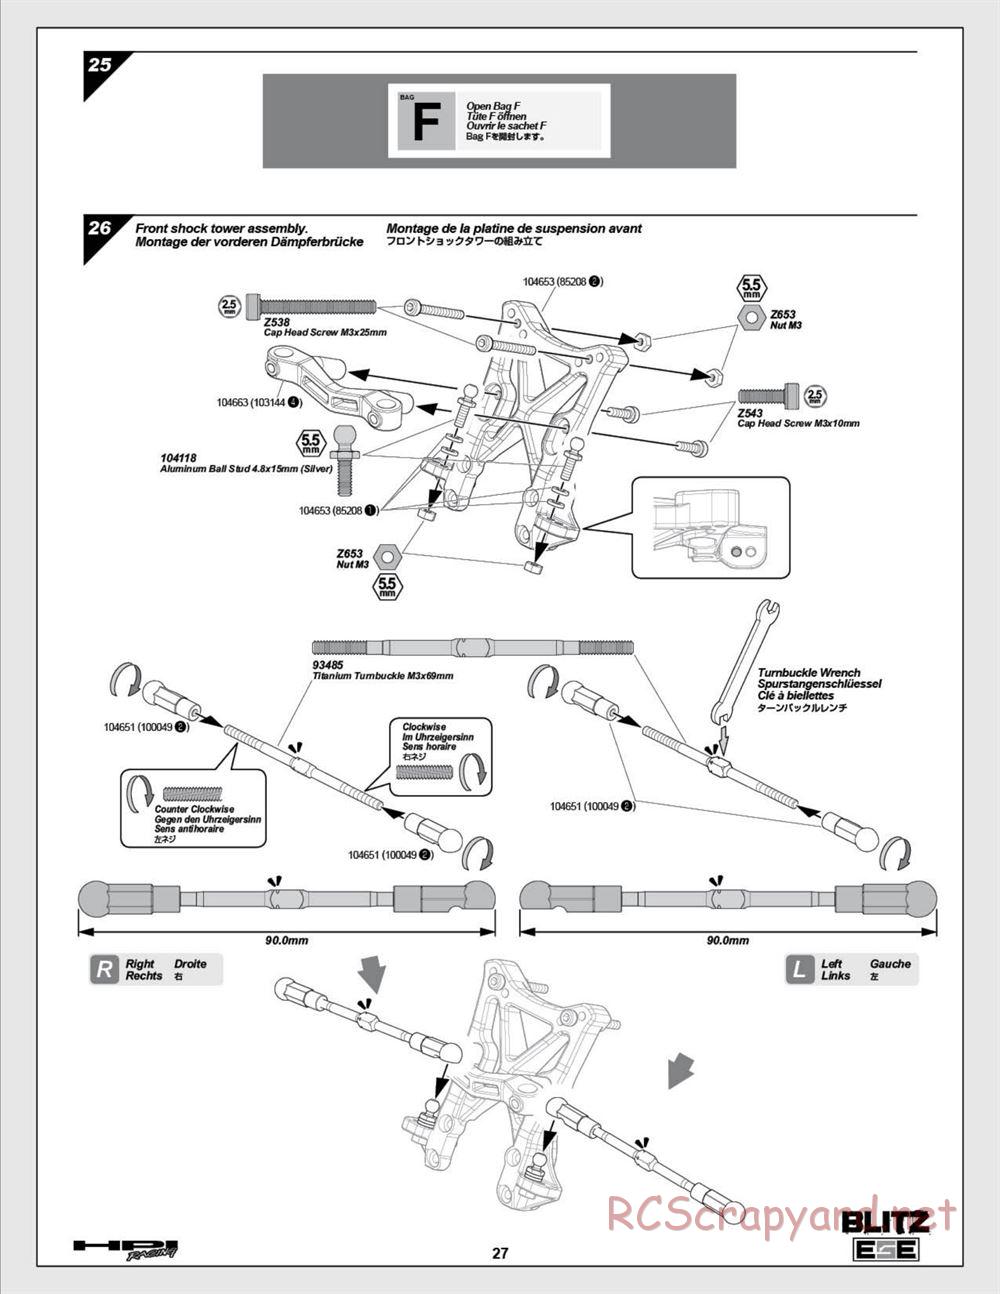 HPI - Blitz ESE - Manual - Page 27